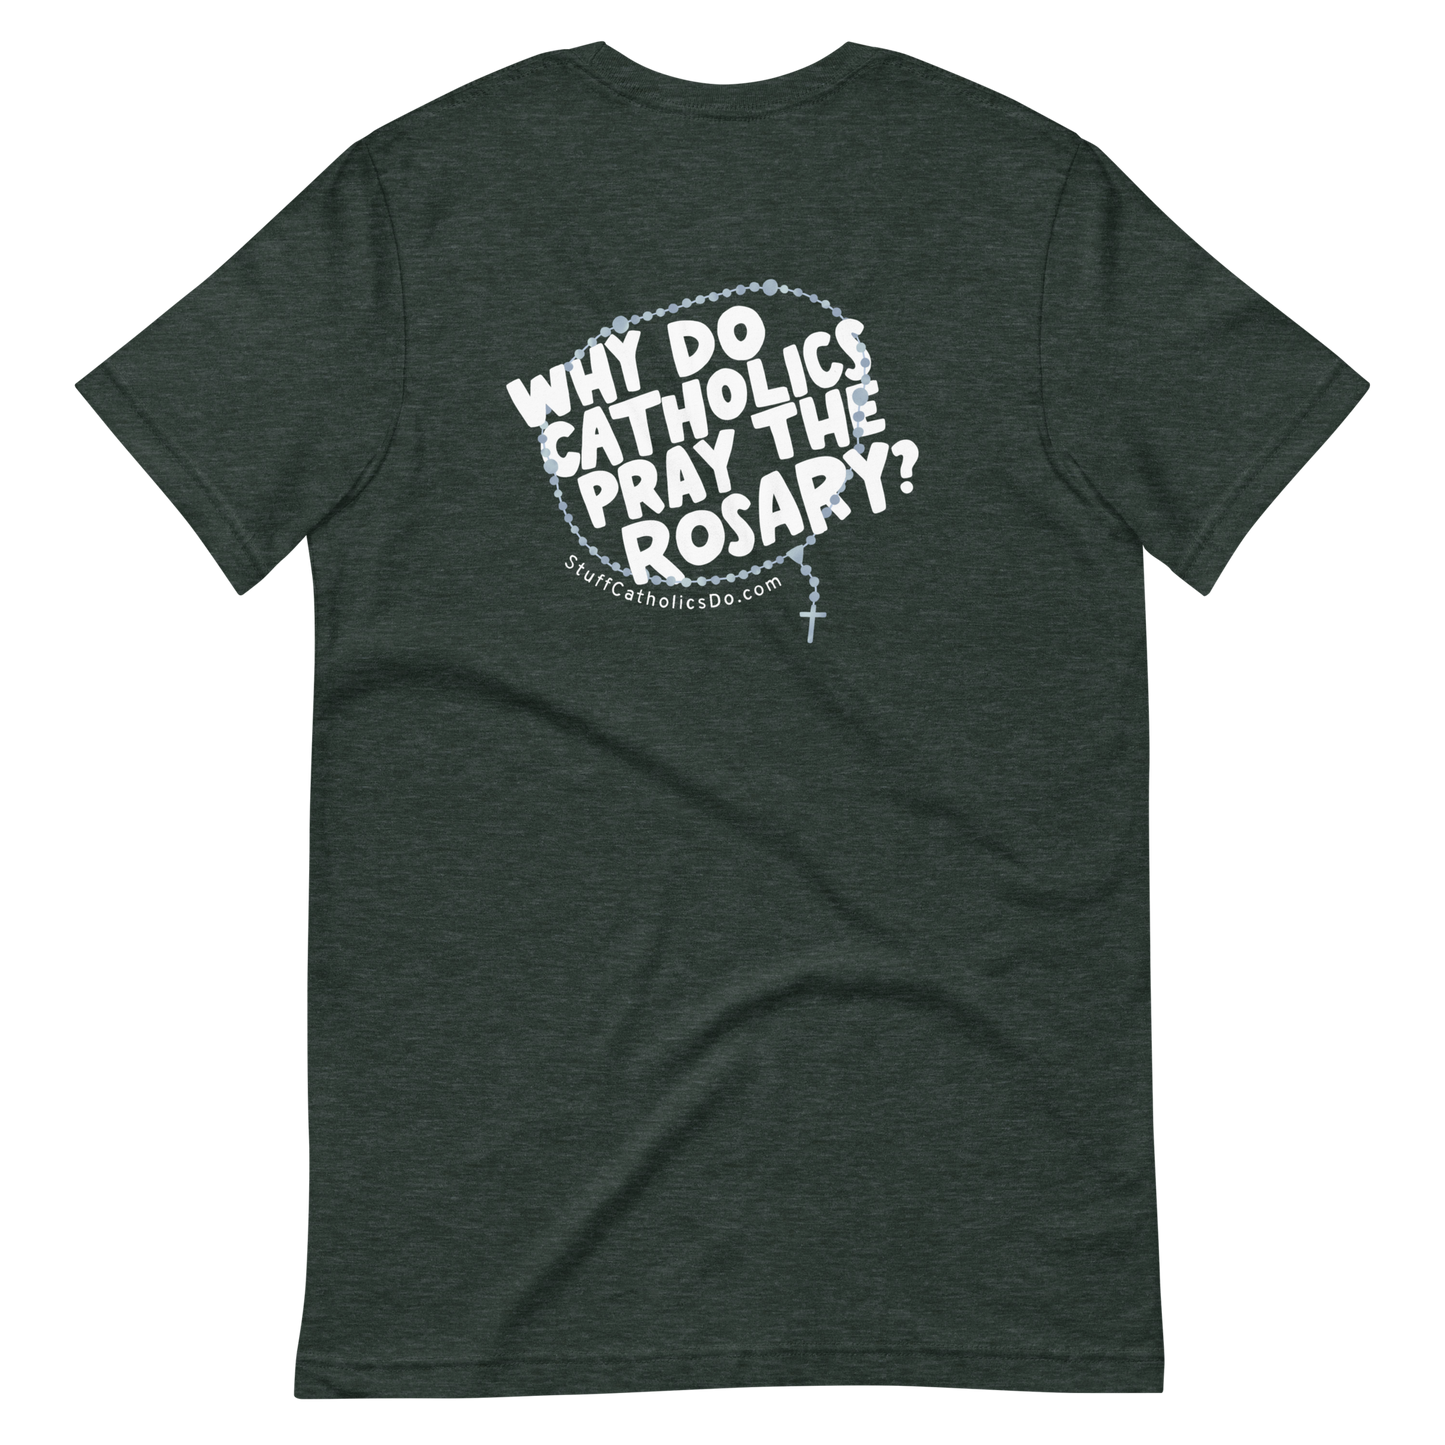 "Why Do Catholics Pray the Rosary?" T-Shirt - Front and Back